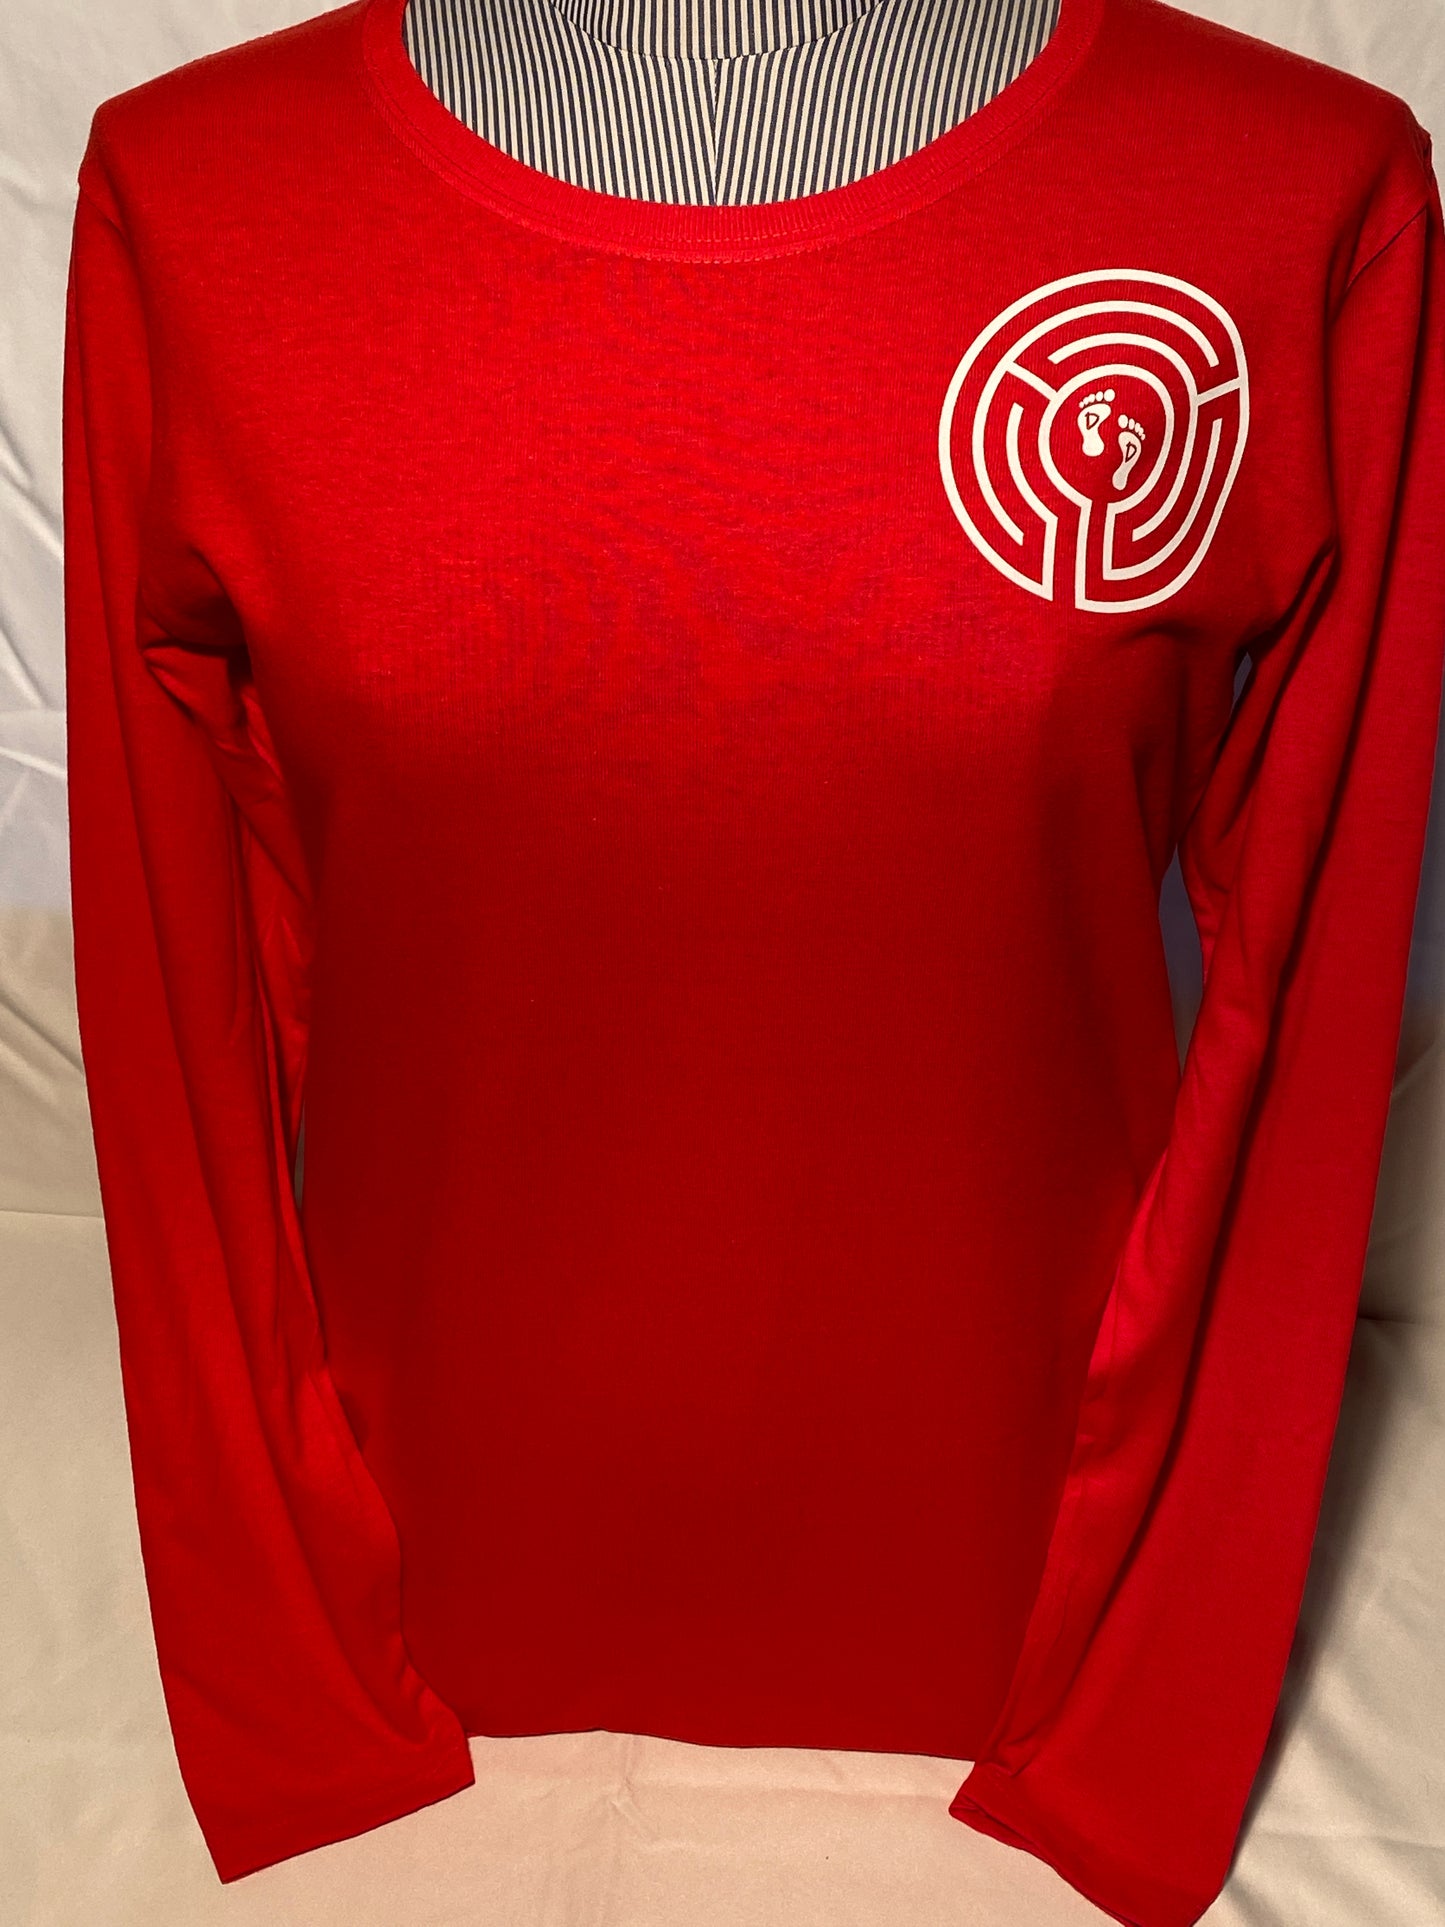 Ladies Long-sleeved T-shirt, red